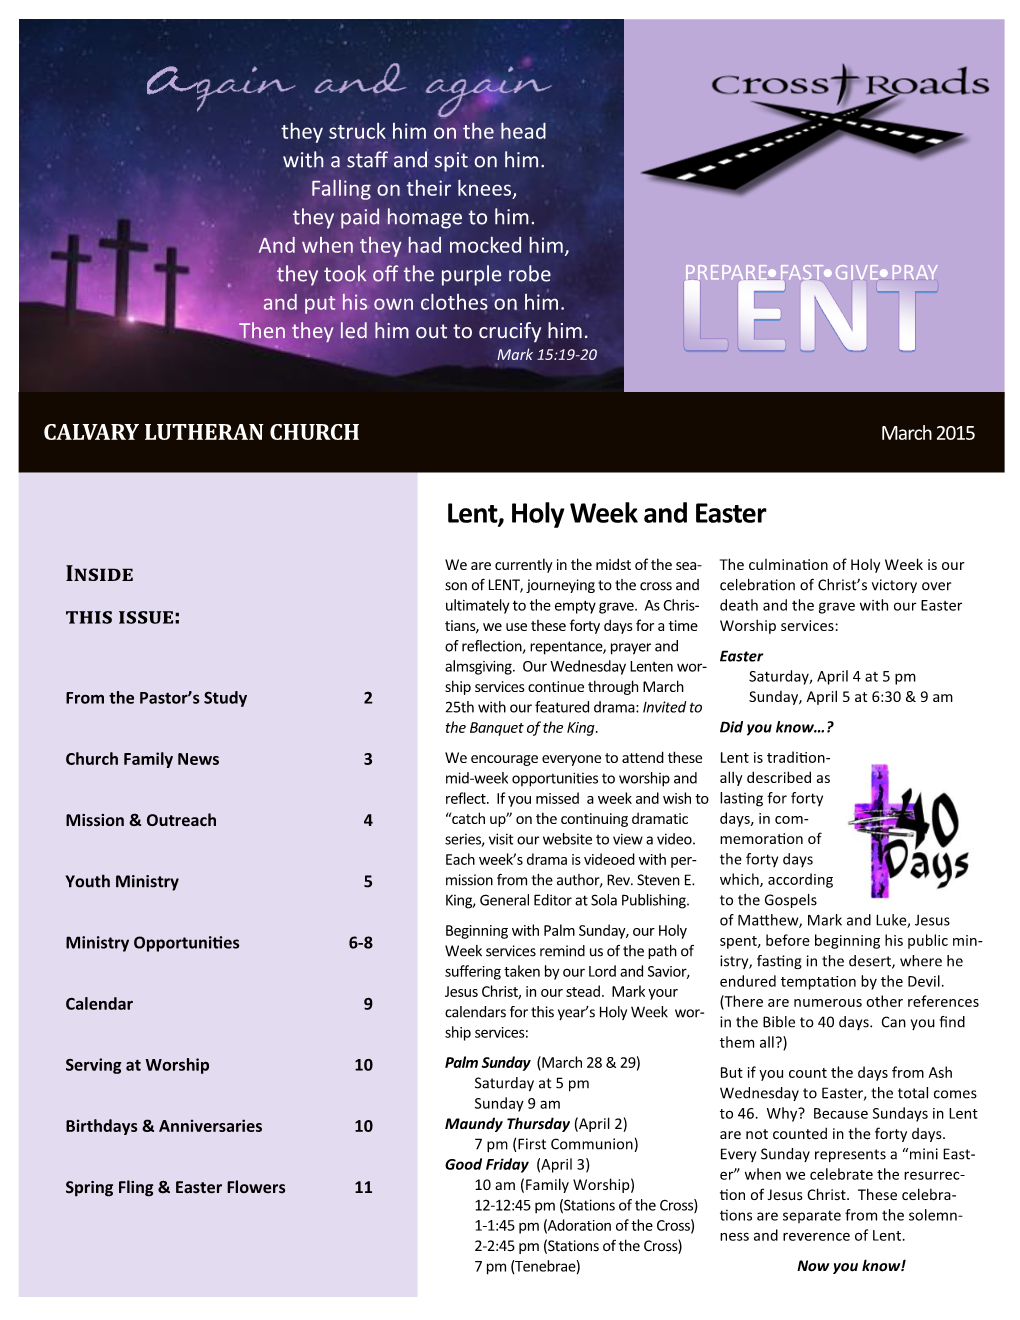 Lent, Holy Week and Easter